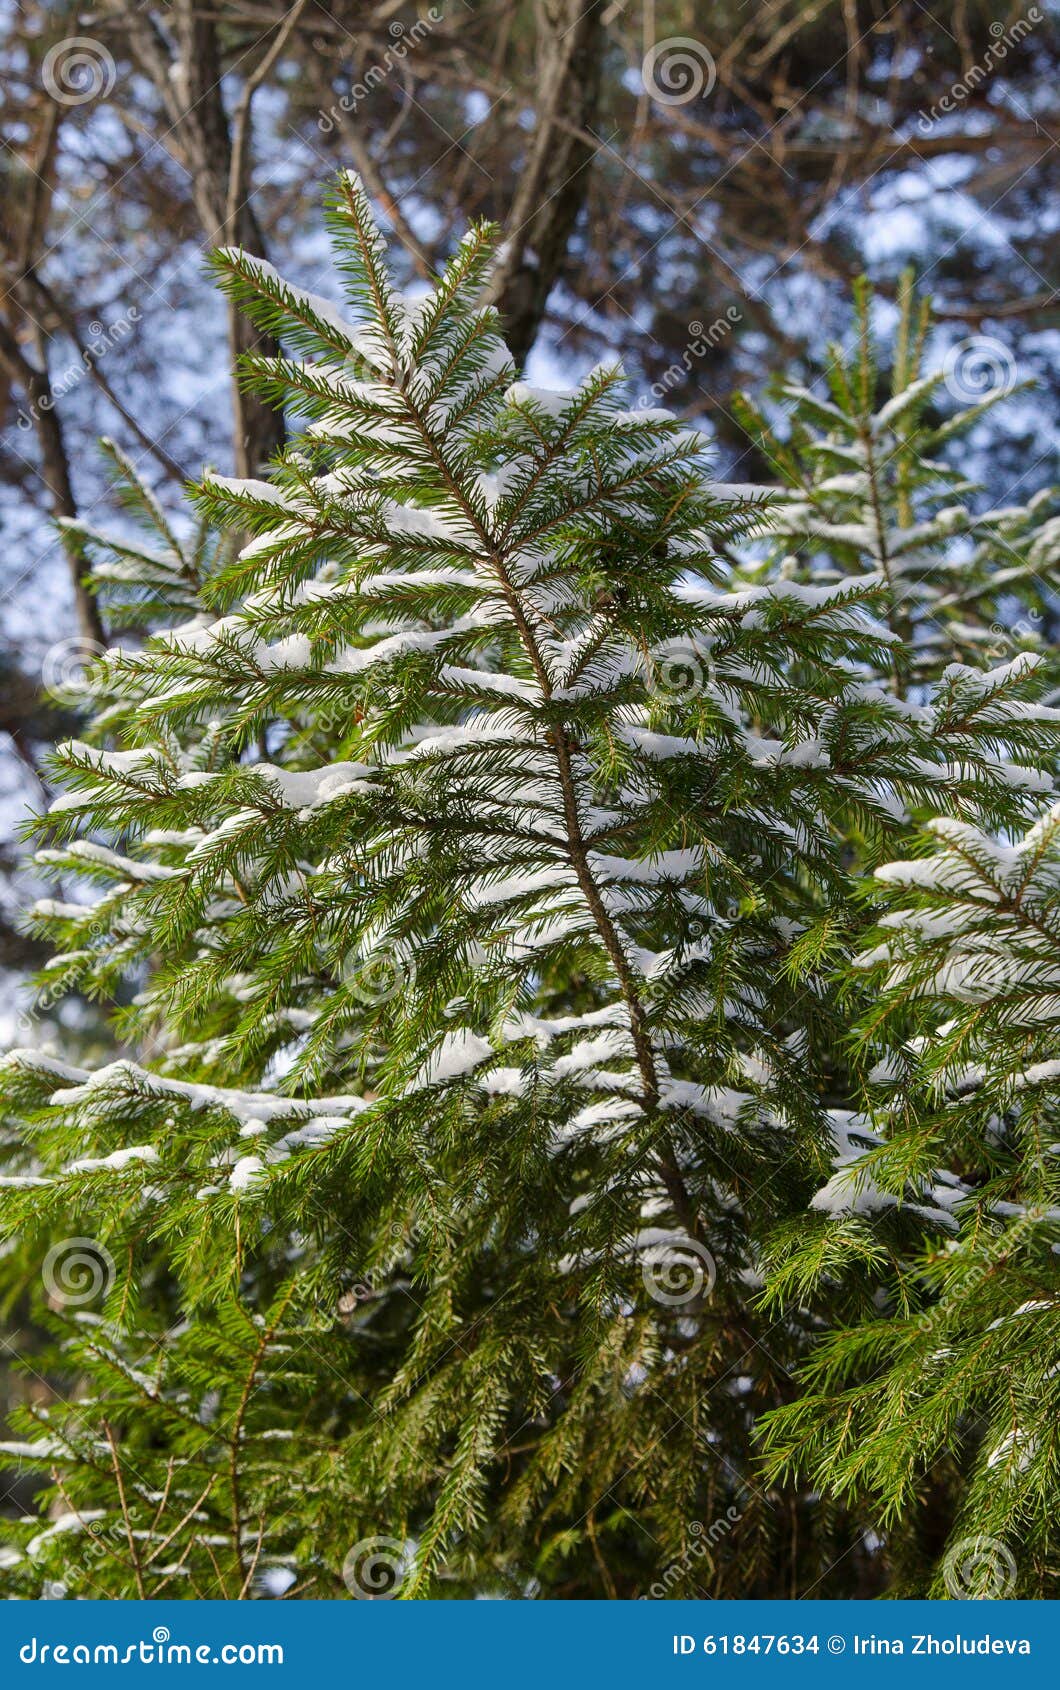 Big Fur-tree Branch with Snow Stock Photo - Image of celebrate ...